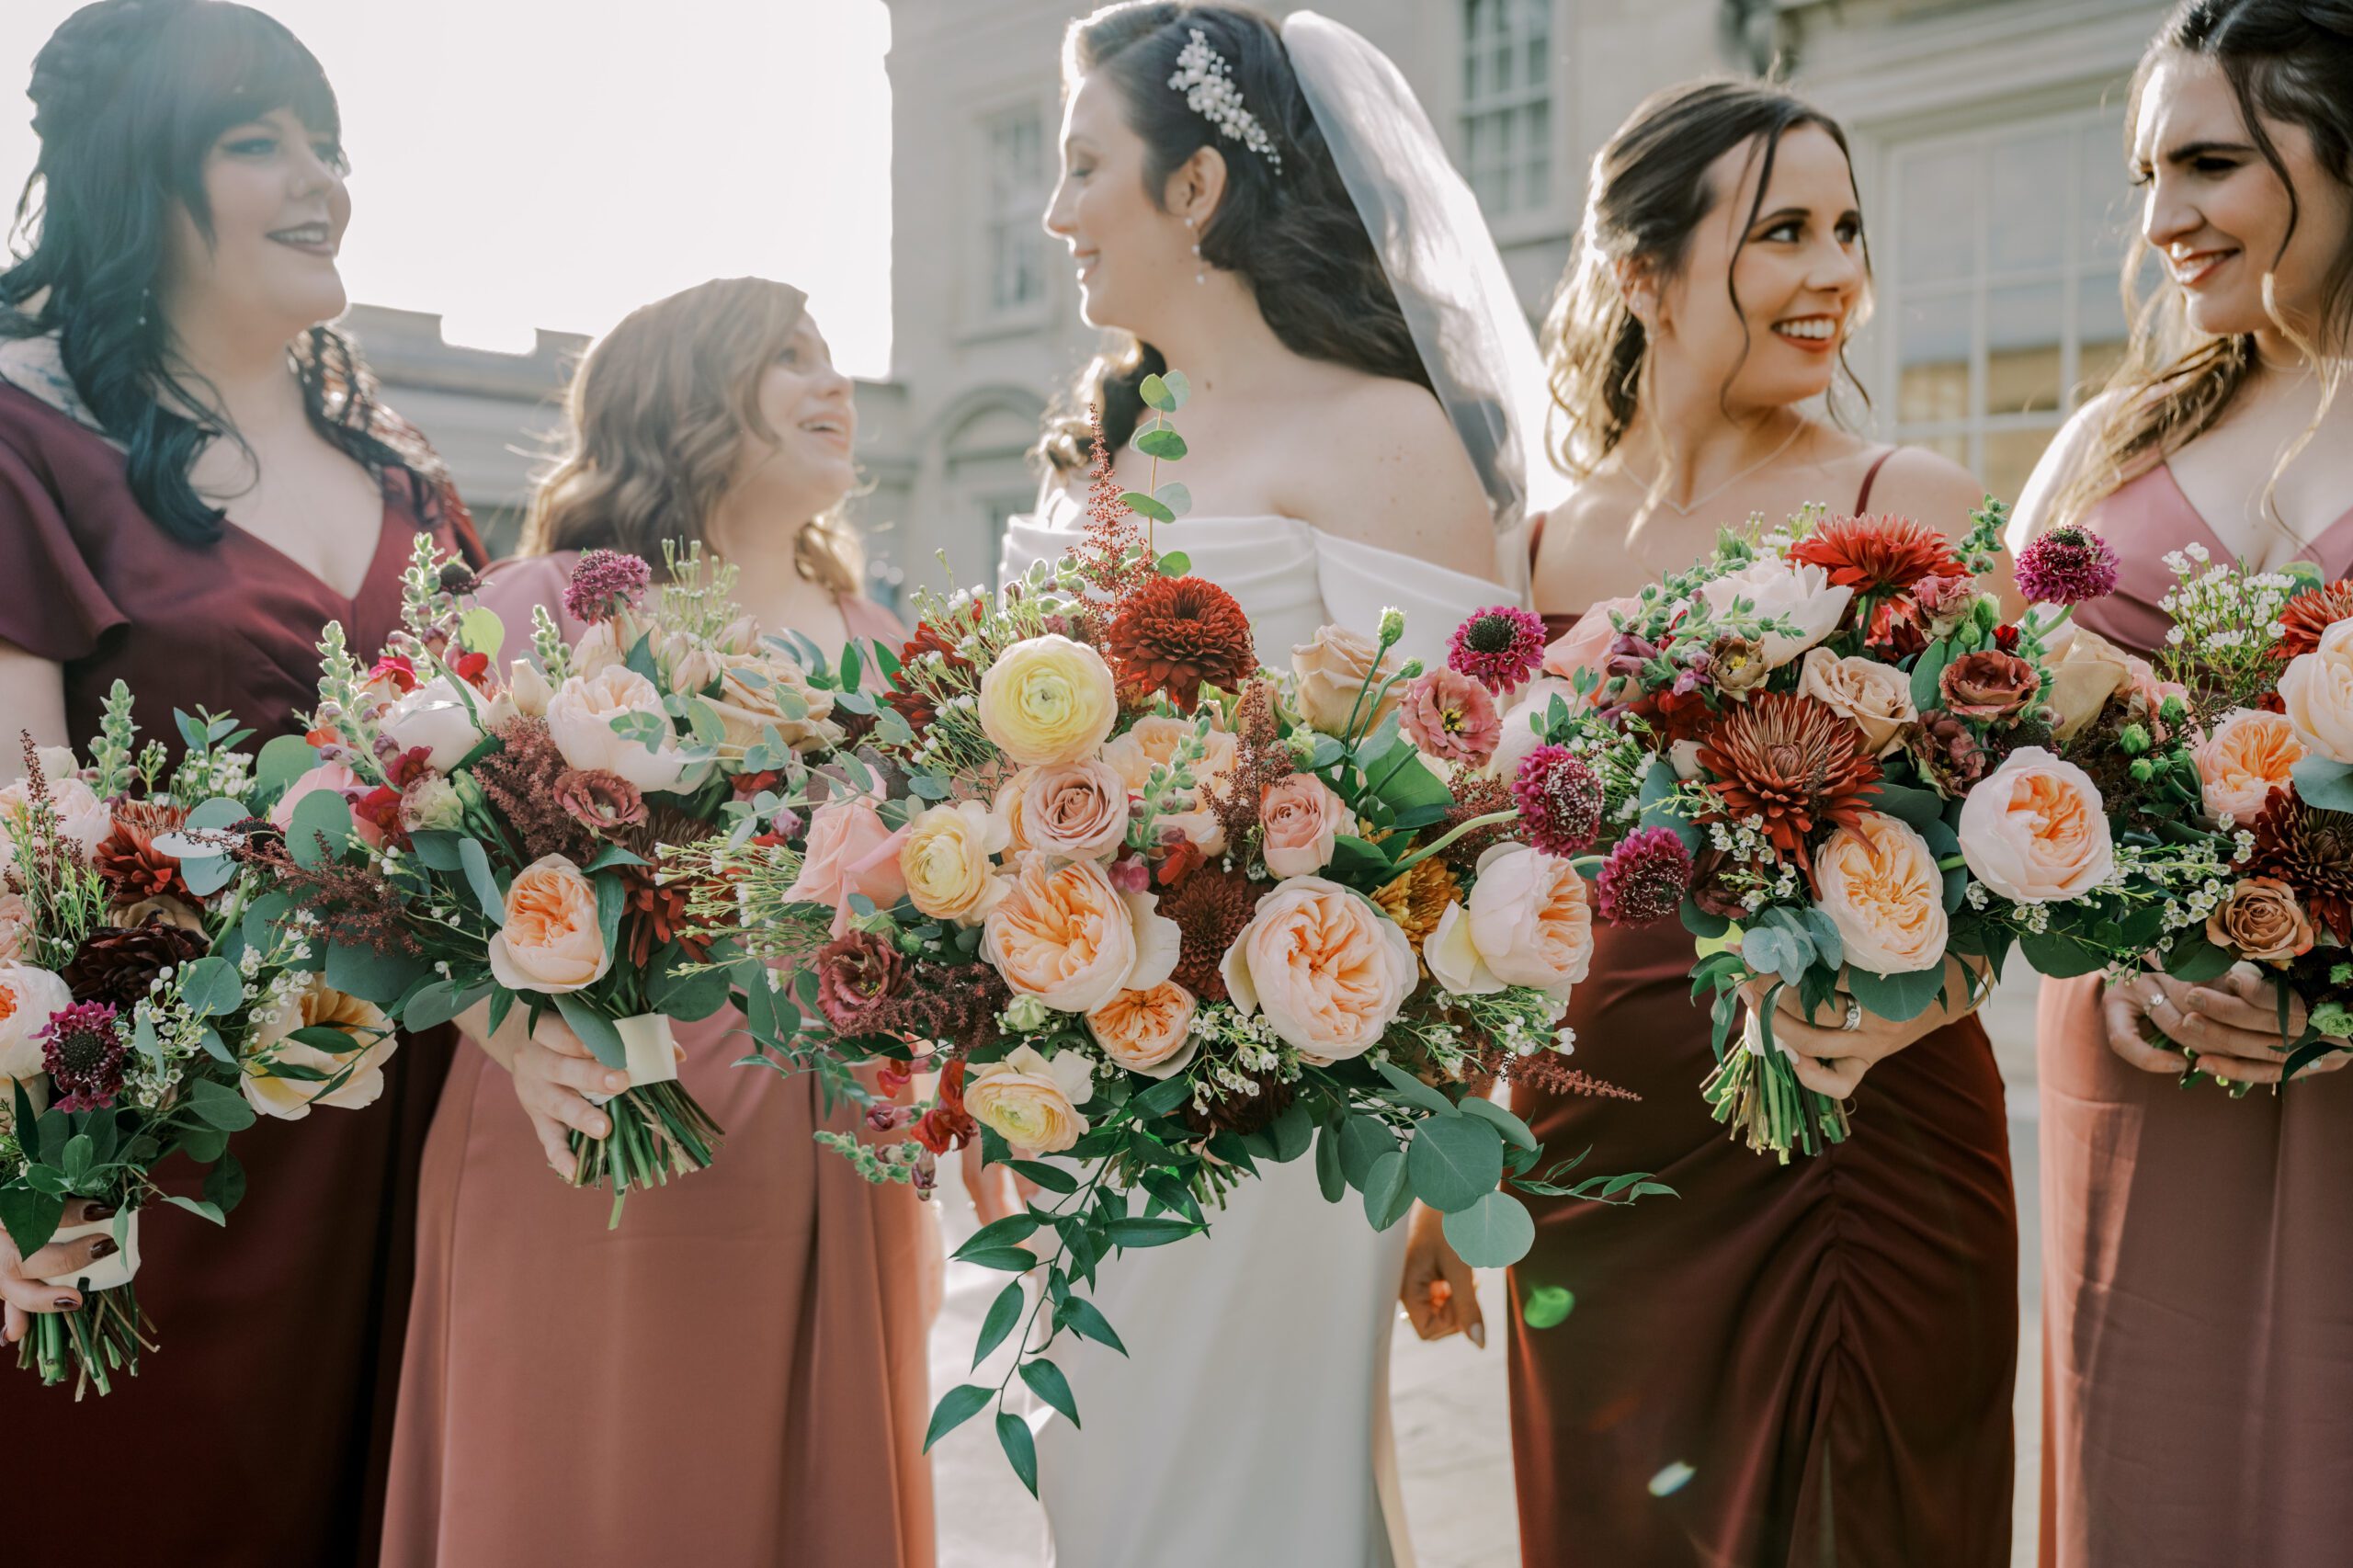 Close up image of floral bouquets with red, pink, burgundy, and peach colored flowers, bride and bridesmaids slightly out of focus in background looking at one another